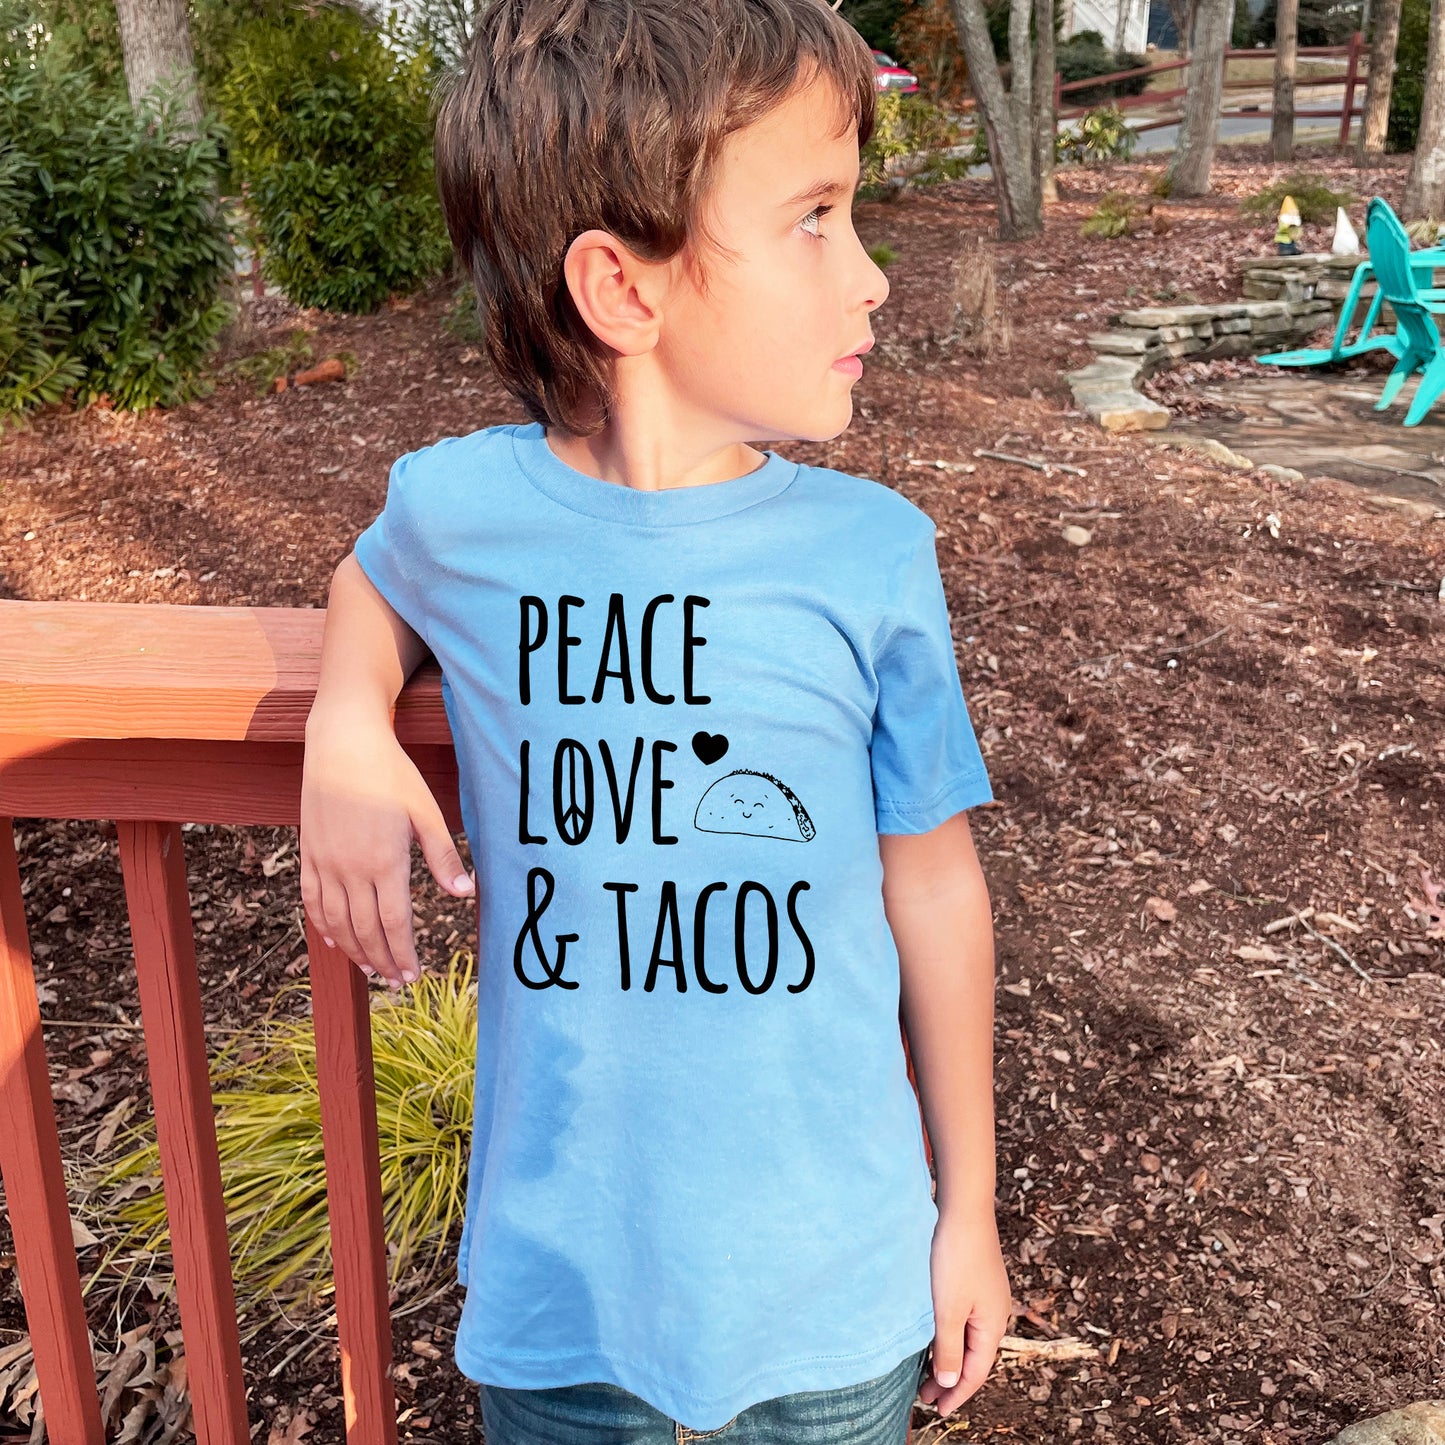 Peace Love & Tacos - Kid's Tee - Columbia Blue or Lavender